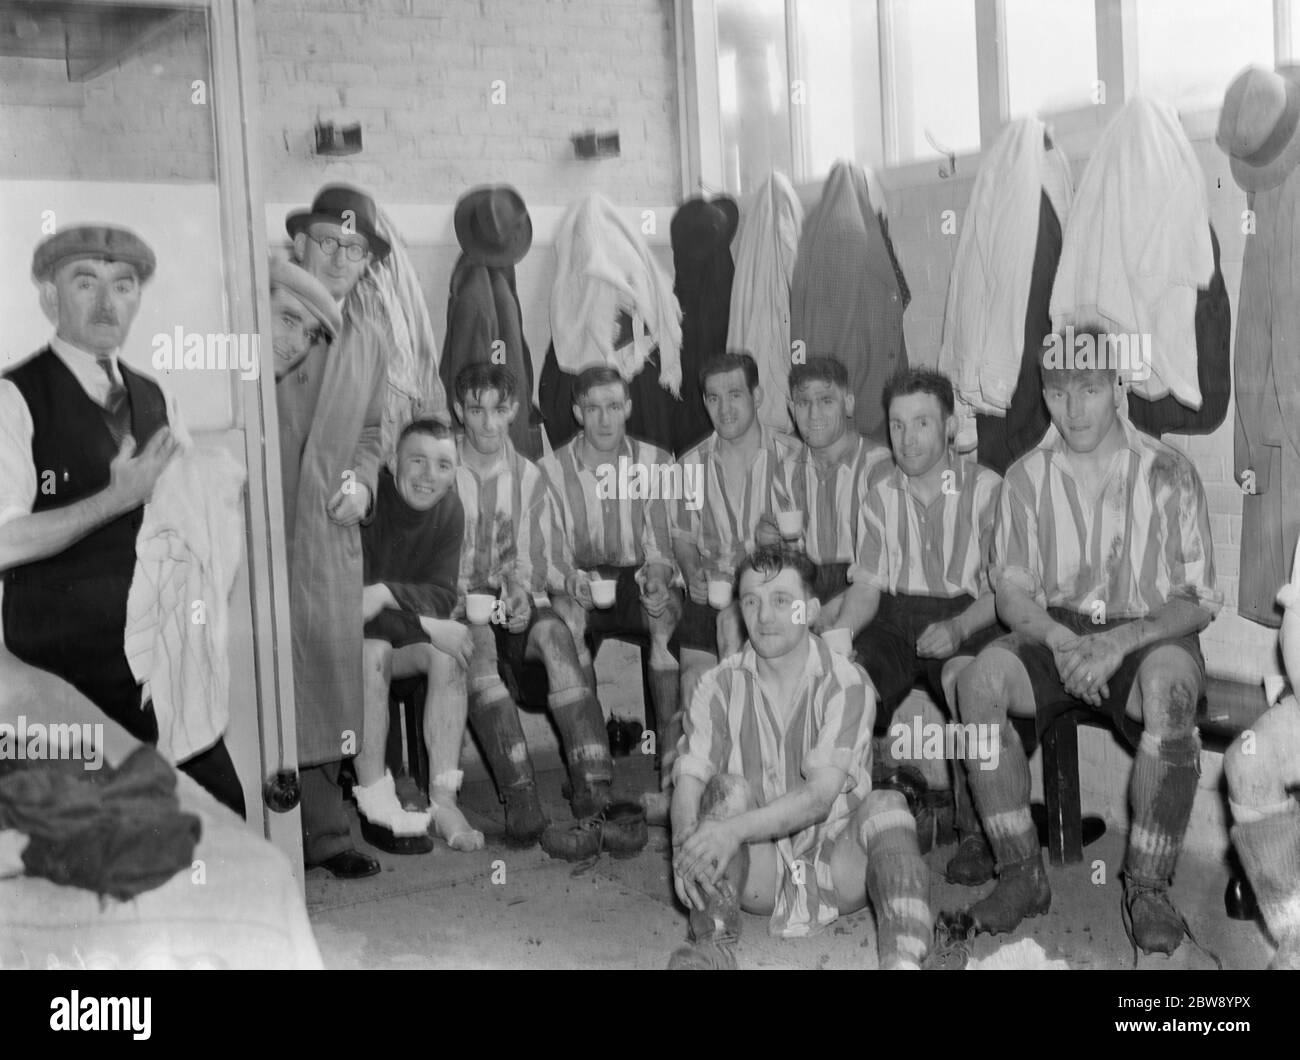 Dartford - Players after their victory over Guildford City. Scorer Joe Harron is on the floor. Manager Bill Collier is peeping around the door. - 17/04/37 Dartford Club dressing room , footballers . 1937 Stock Photo